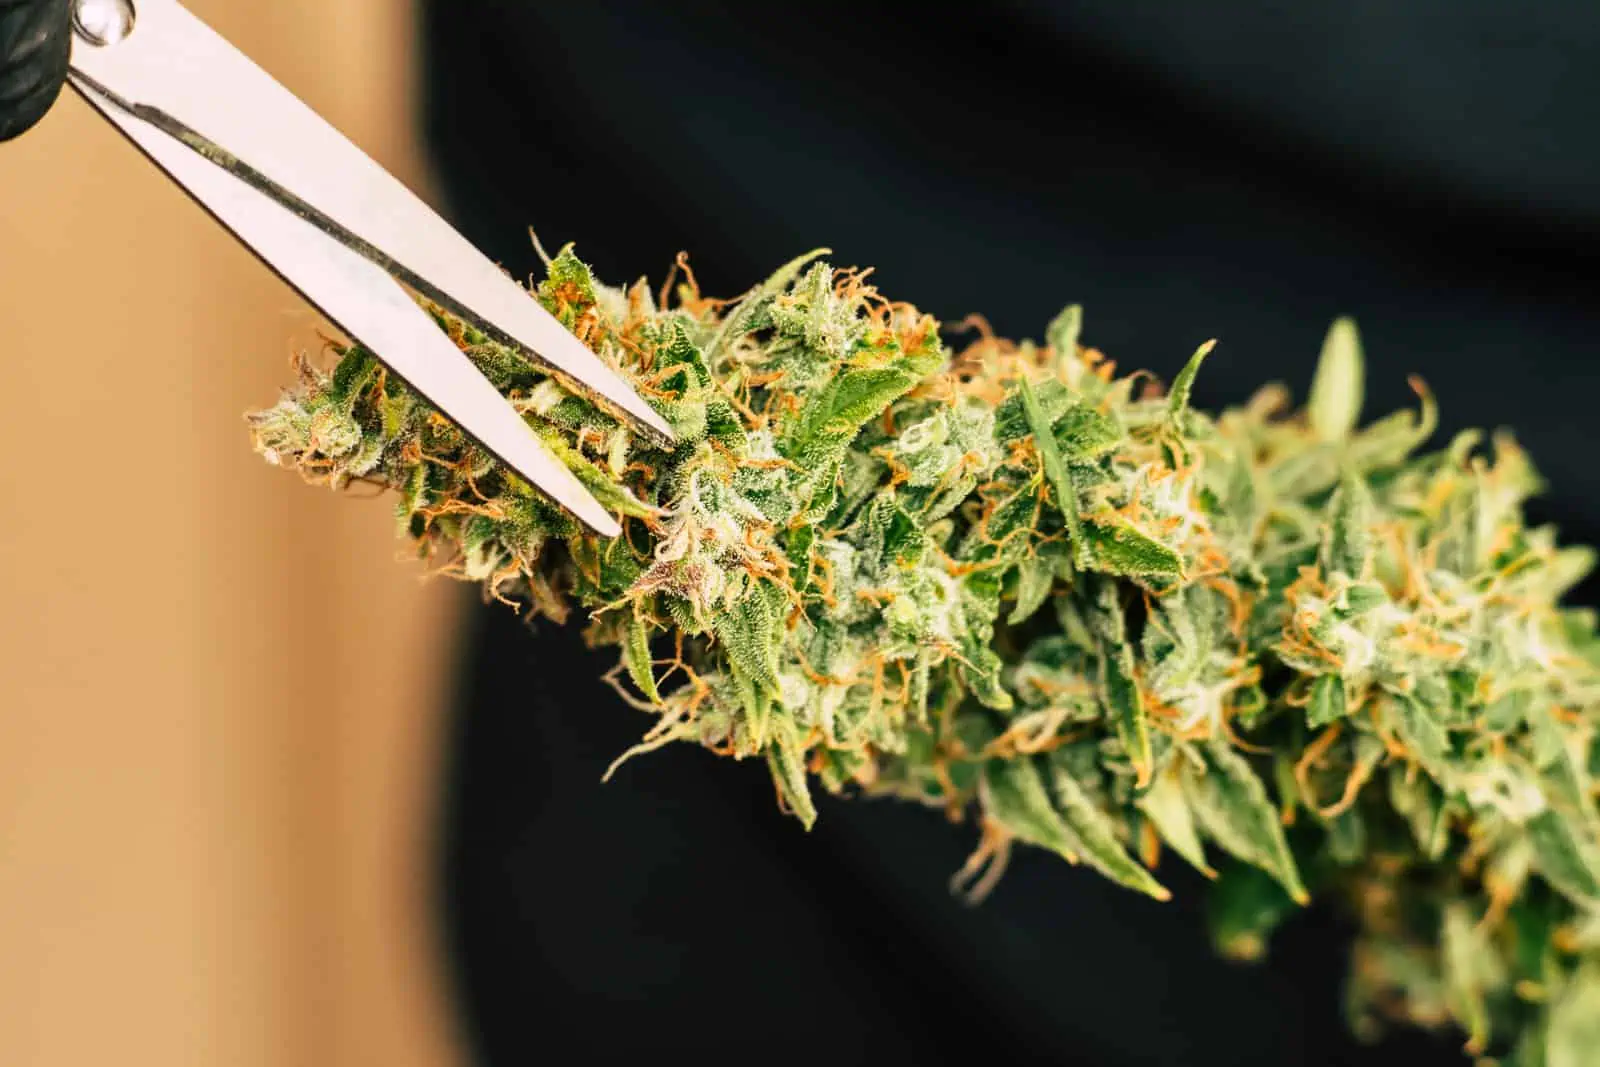 Here’s What Working As A Cannabis Trimmer Is Really Like